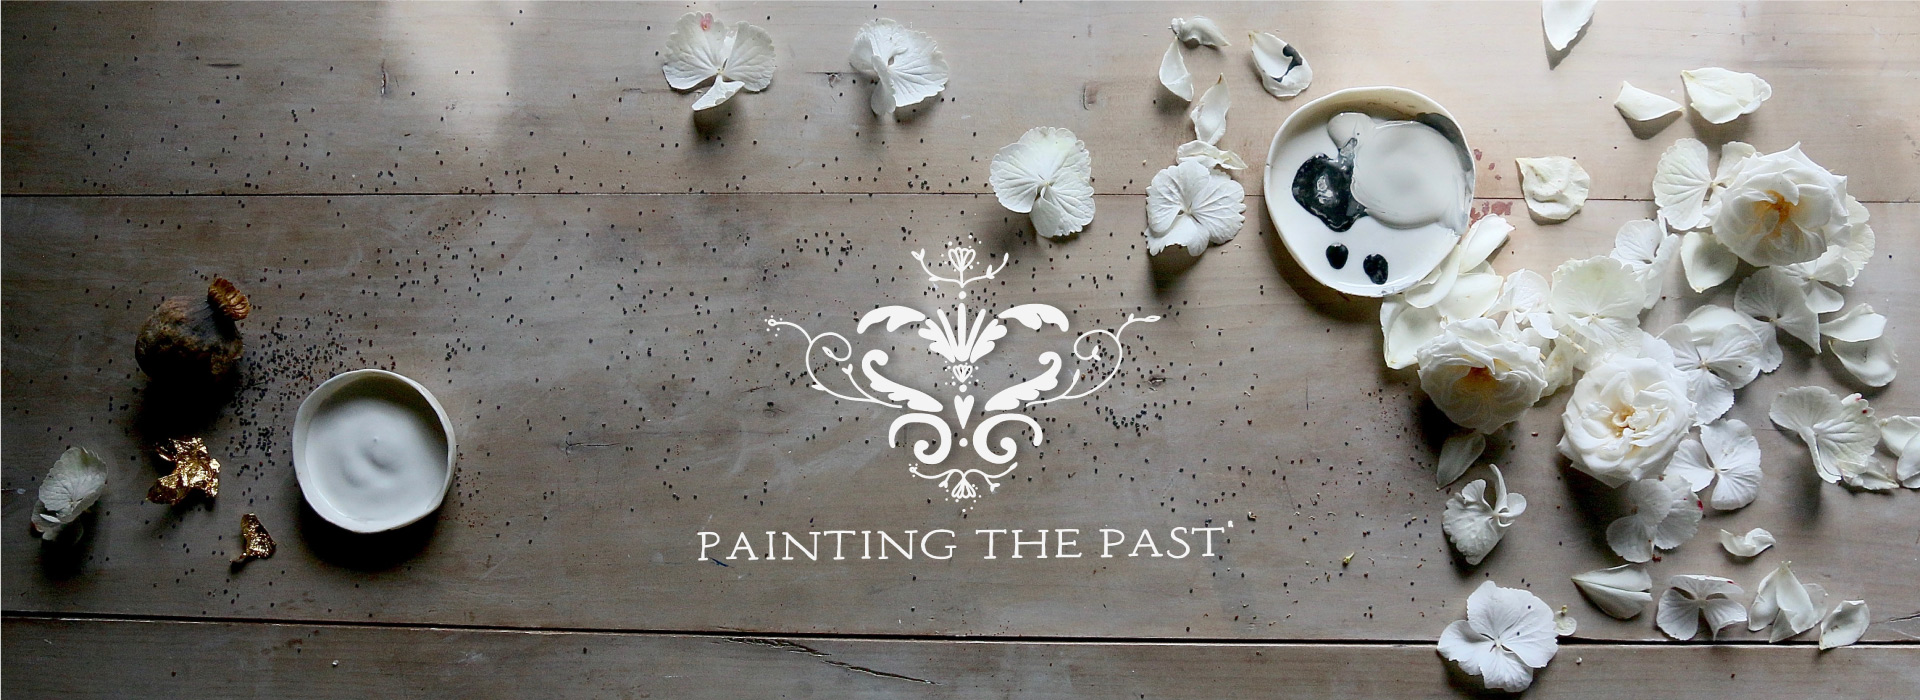 home chalk paint painting the past